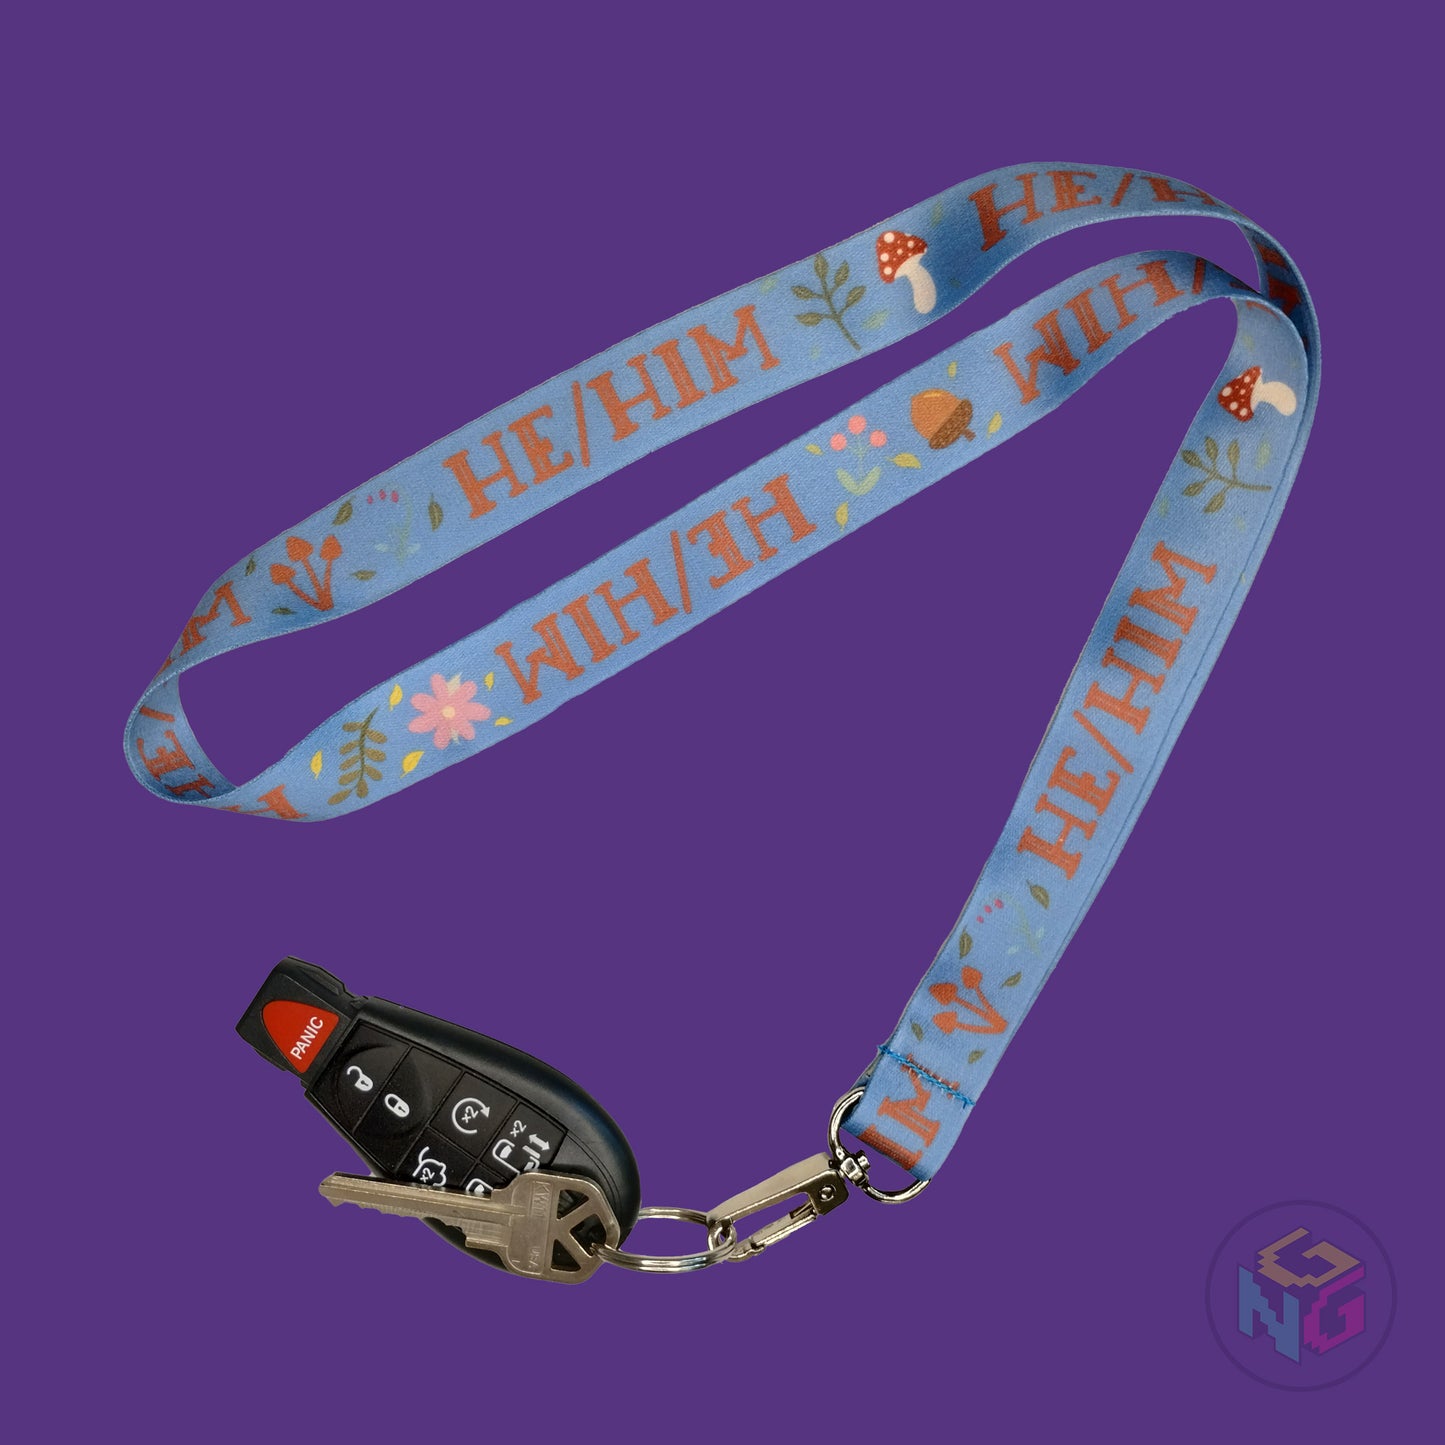 blue he him pronoun lanyard showing the brown text, mushrooms, leaves, and flower details with a key fob clipped to the end of the lanyard